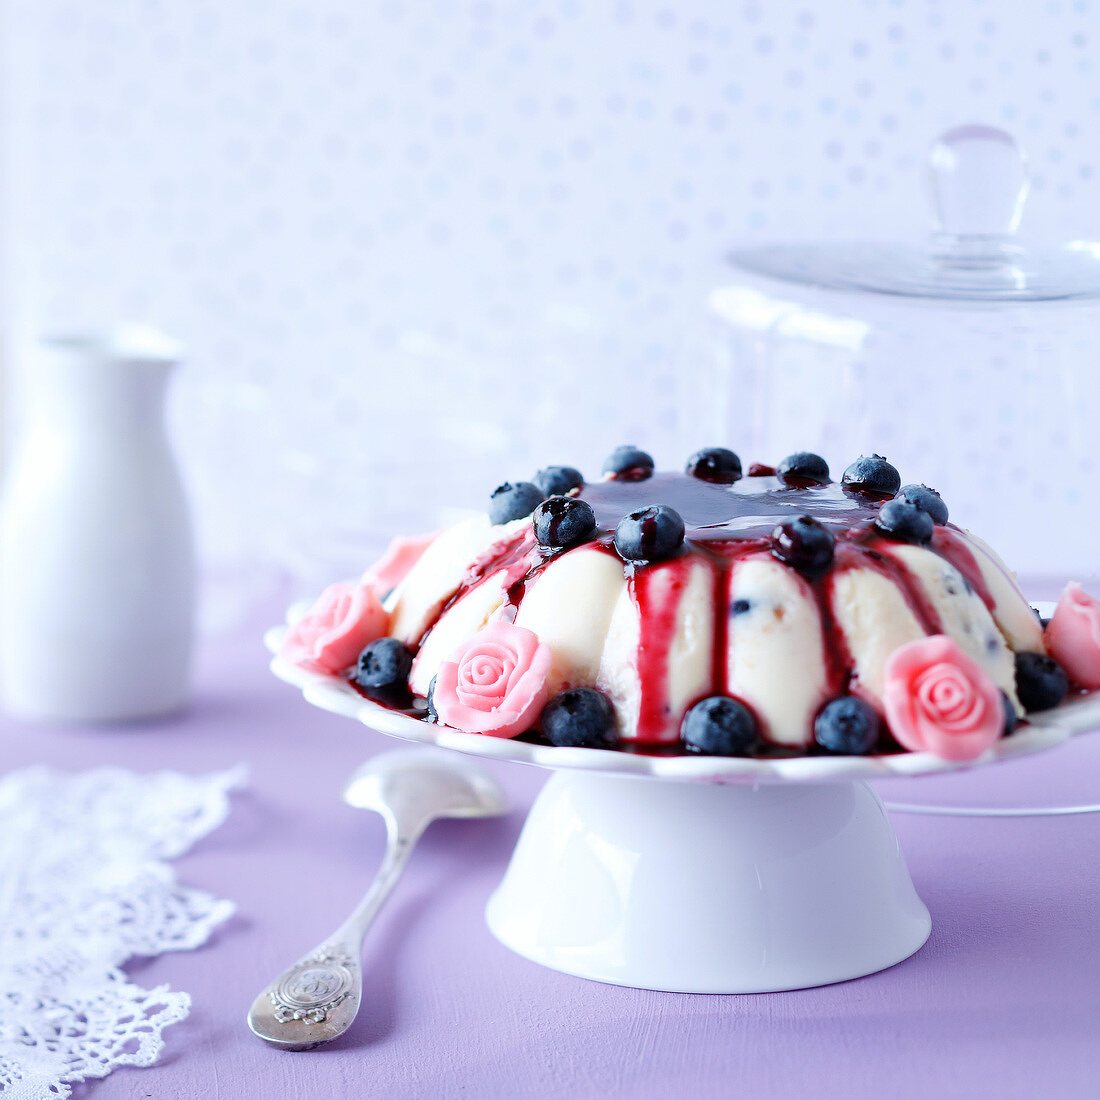 Charlotte-style blueberry entremets